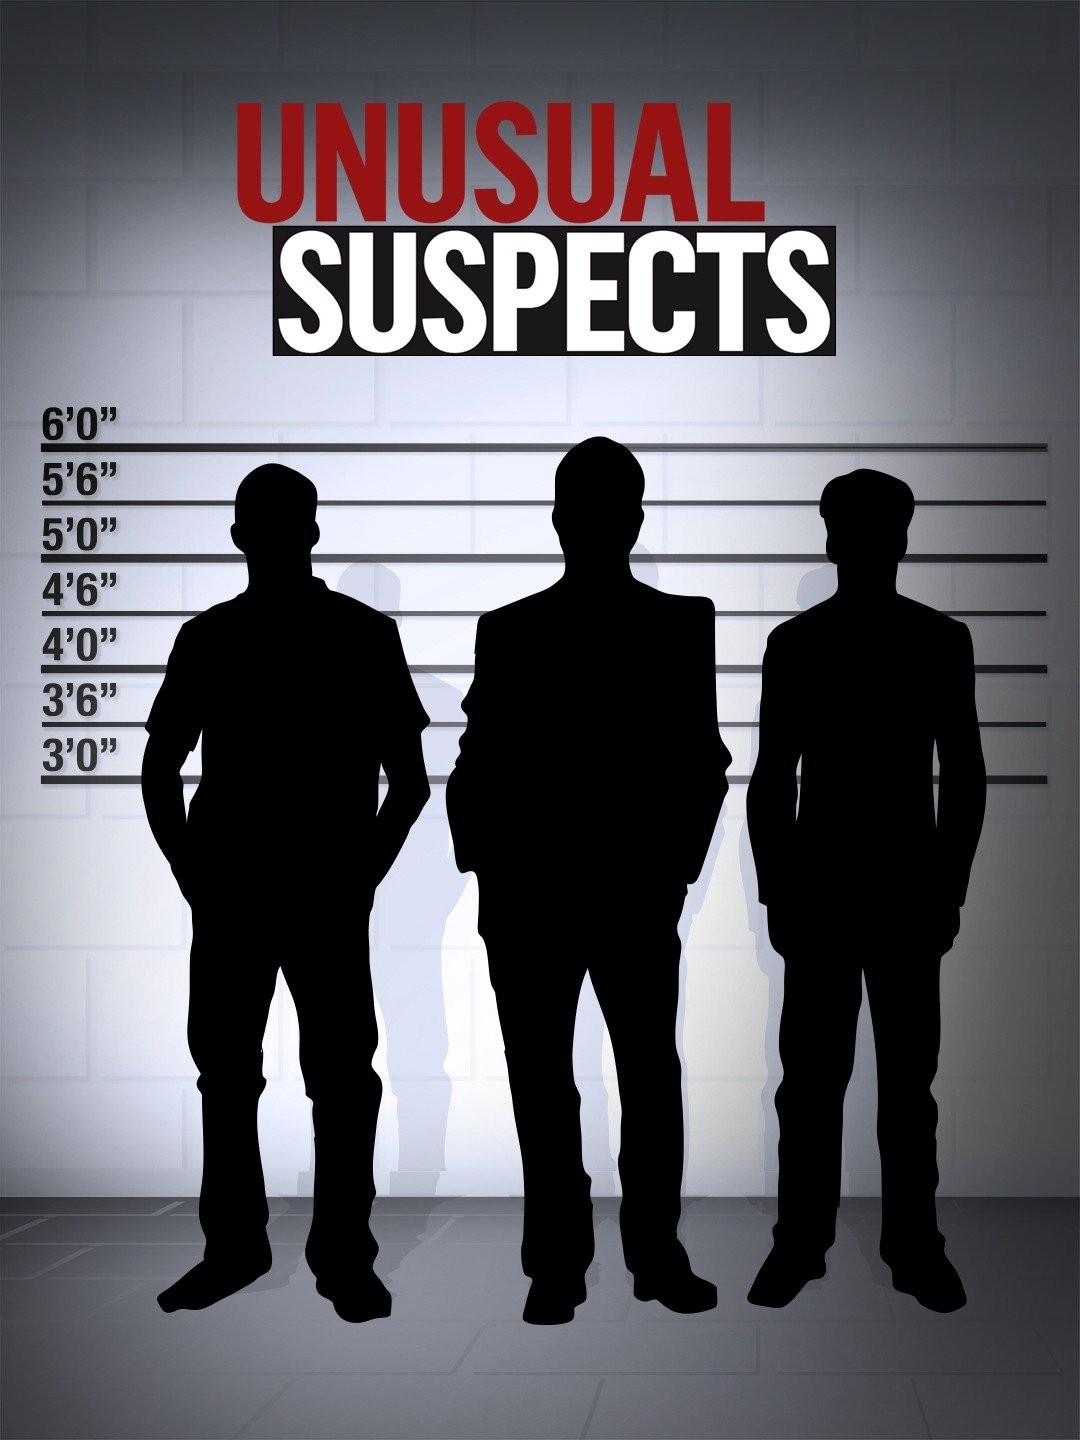 The Usual Suspects - Rotten Tomatoes